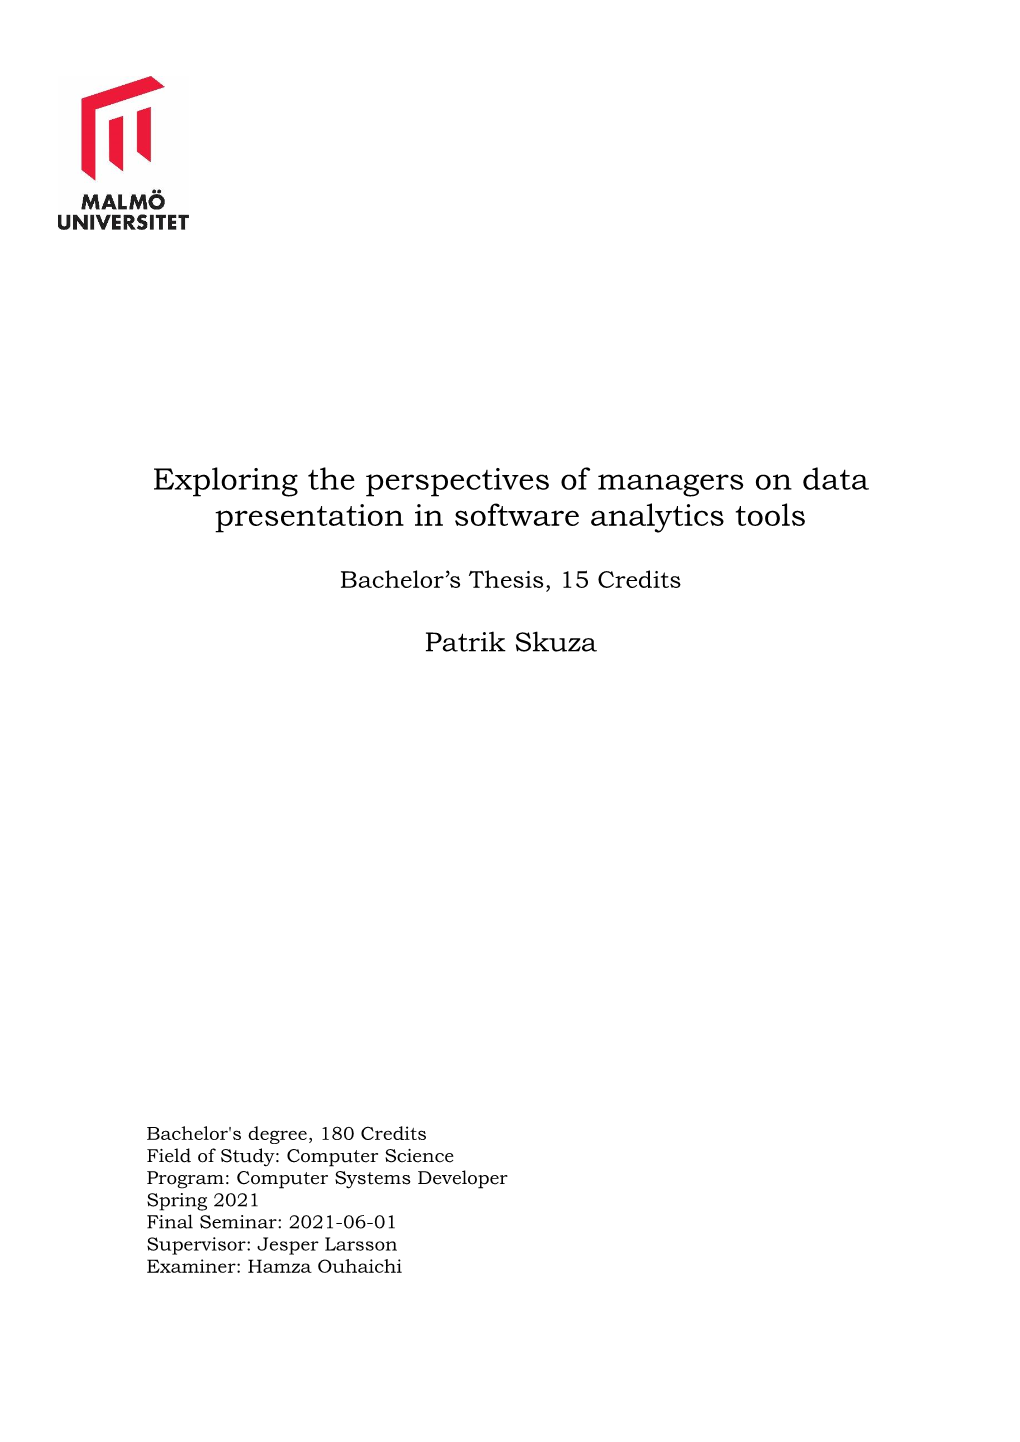 Exploring the Perspectives of Managers on Data Presentation in Software Analytics Tools